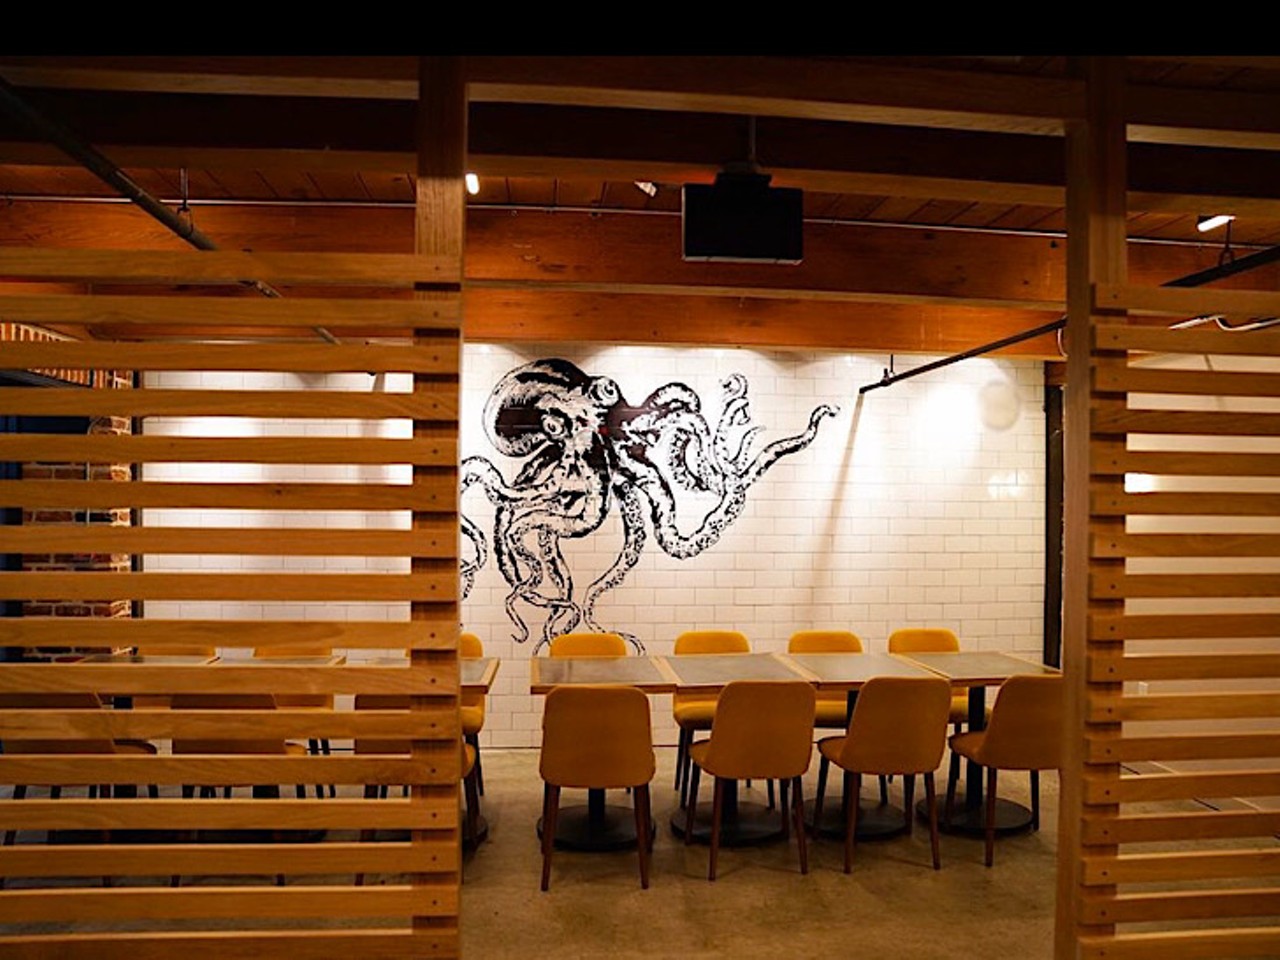 Ichicoro Ane
260 1st Ave S, St. Petersburg, FL
In the basement of Station House you&#146;ll find this Japanese restaurant, offering ramen and cocktails. They also have sake for those interested in broadening their alcohol horizons. 
Photo via Ichicoro Ane/Instagram